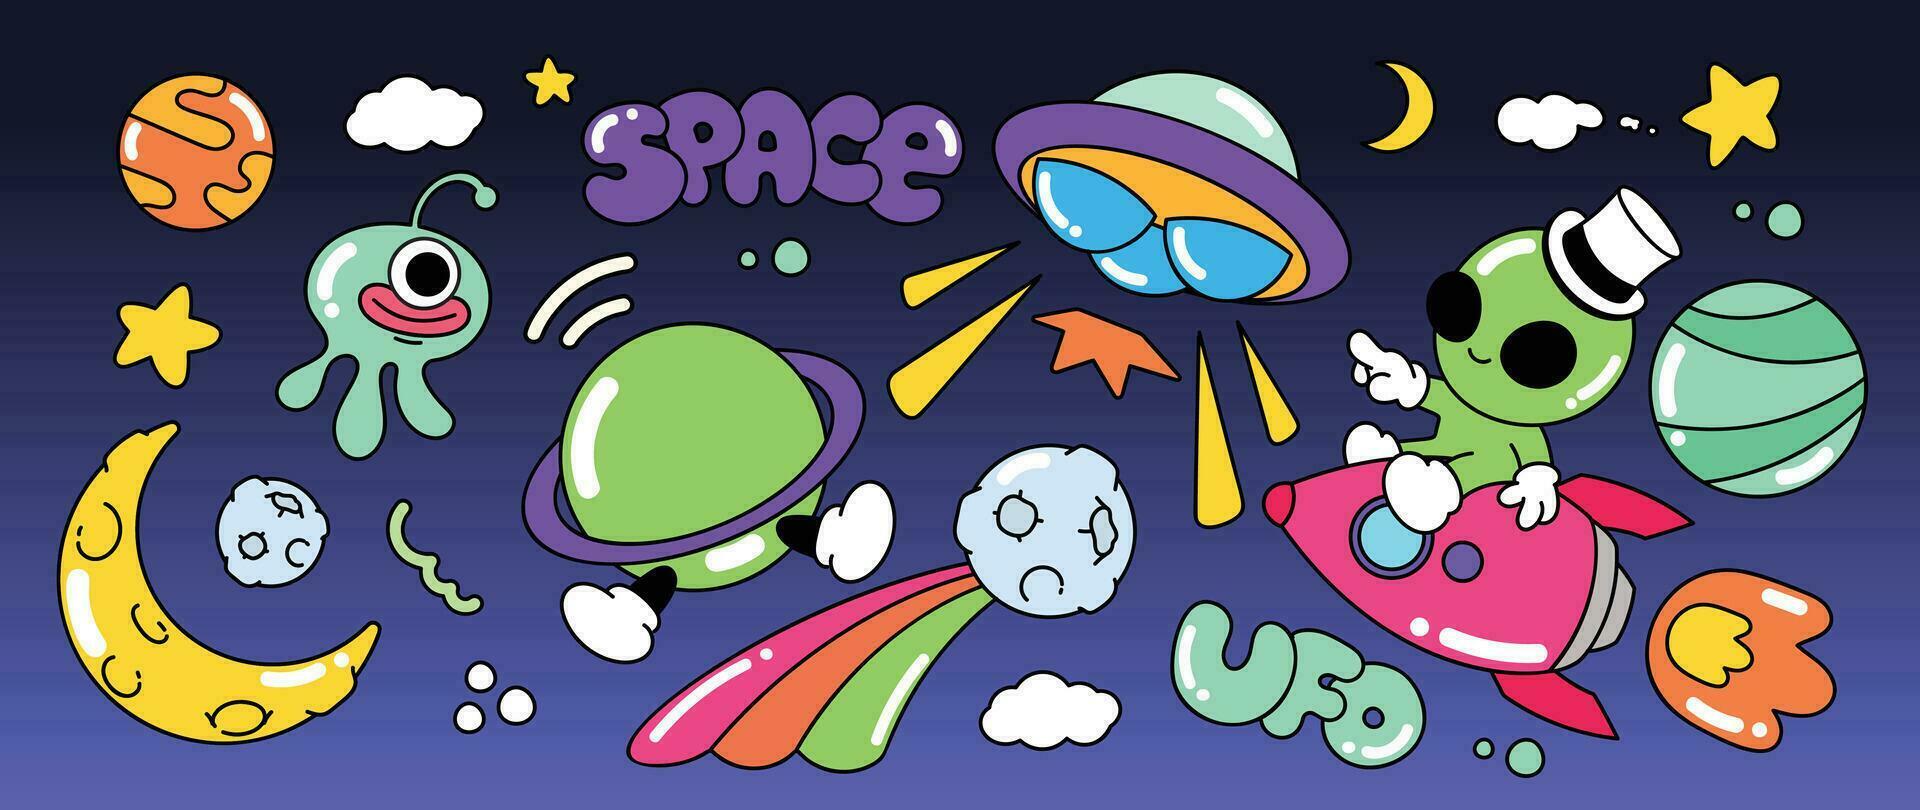 Set of 70s groovy element vector. Collection of cartoon characters, doodle smile face, UFO, UAP, rocket, alien, galaxy, spaceship, moon. Cute retro groovy hippie design for decorative, sticker, kids. vector